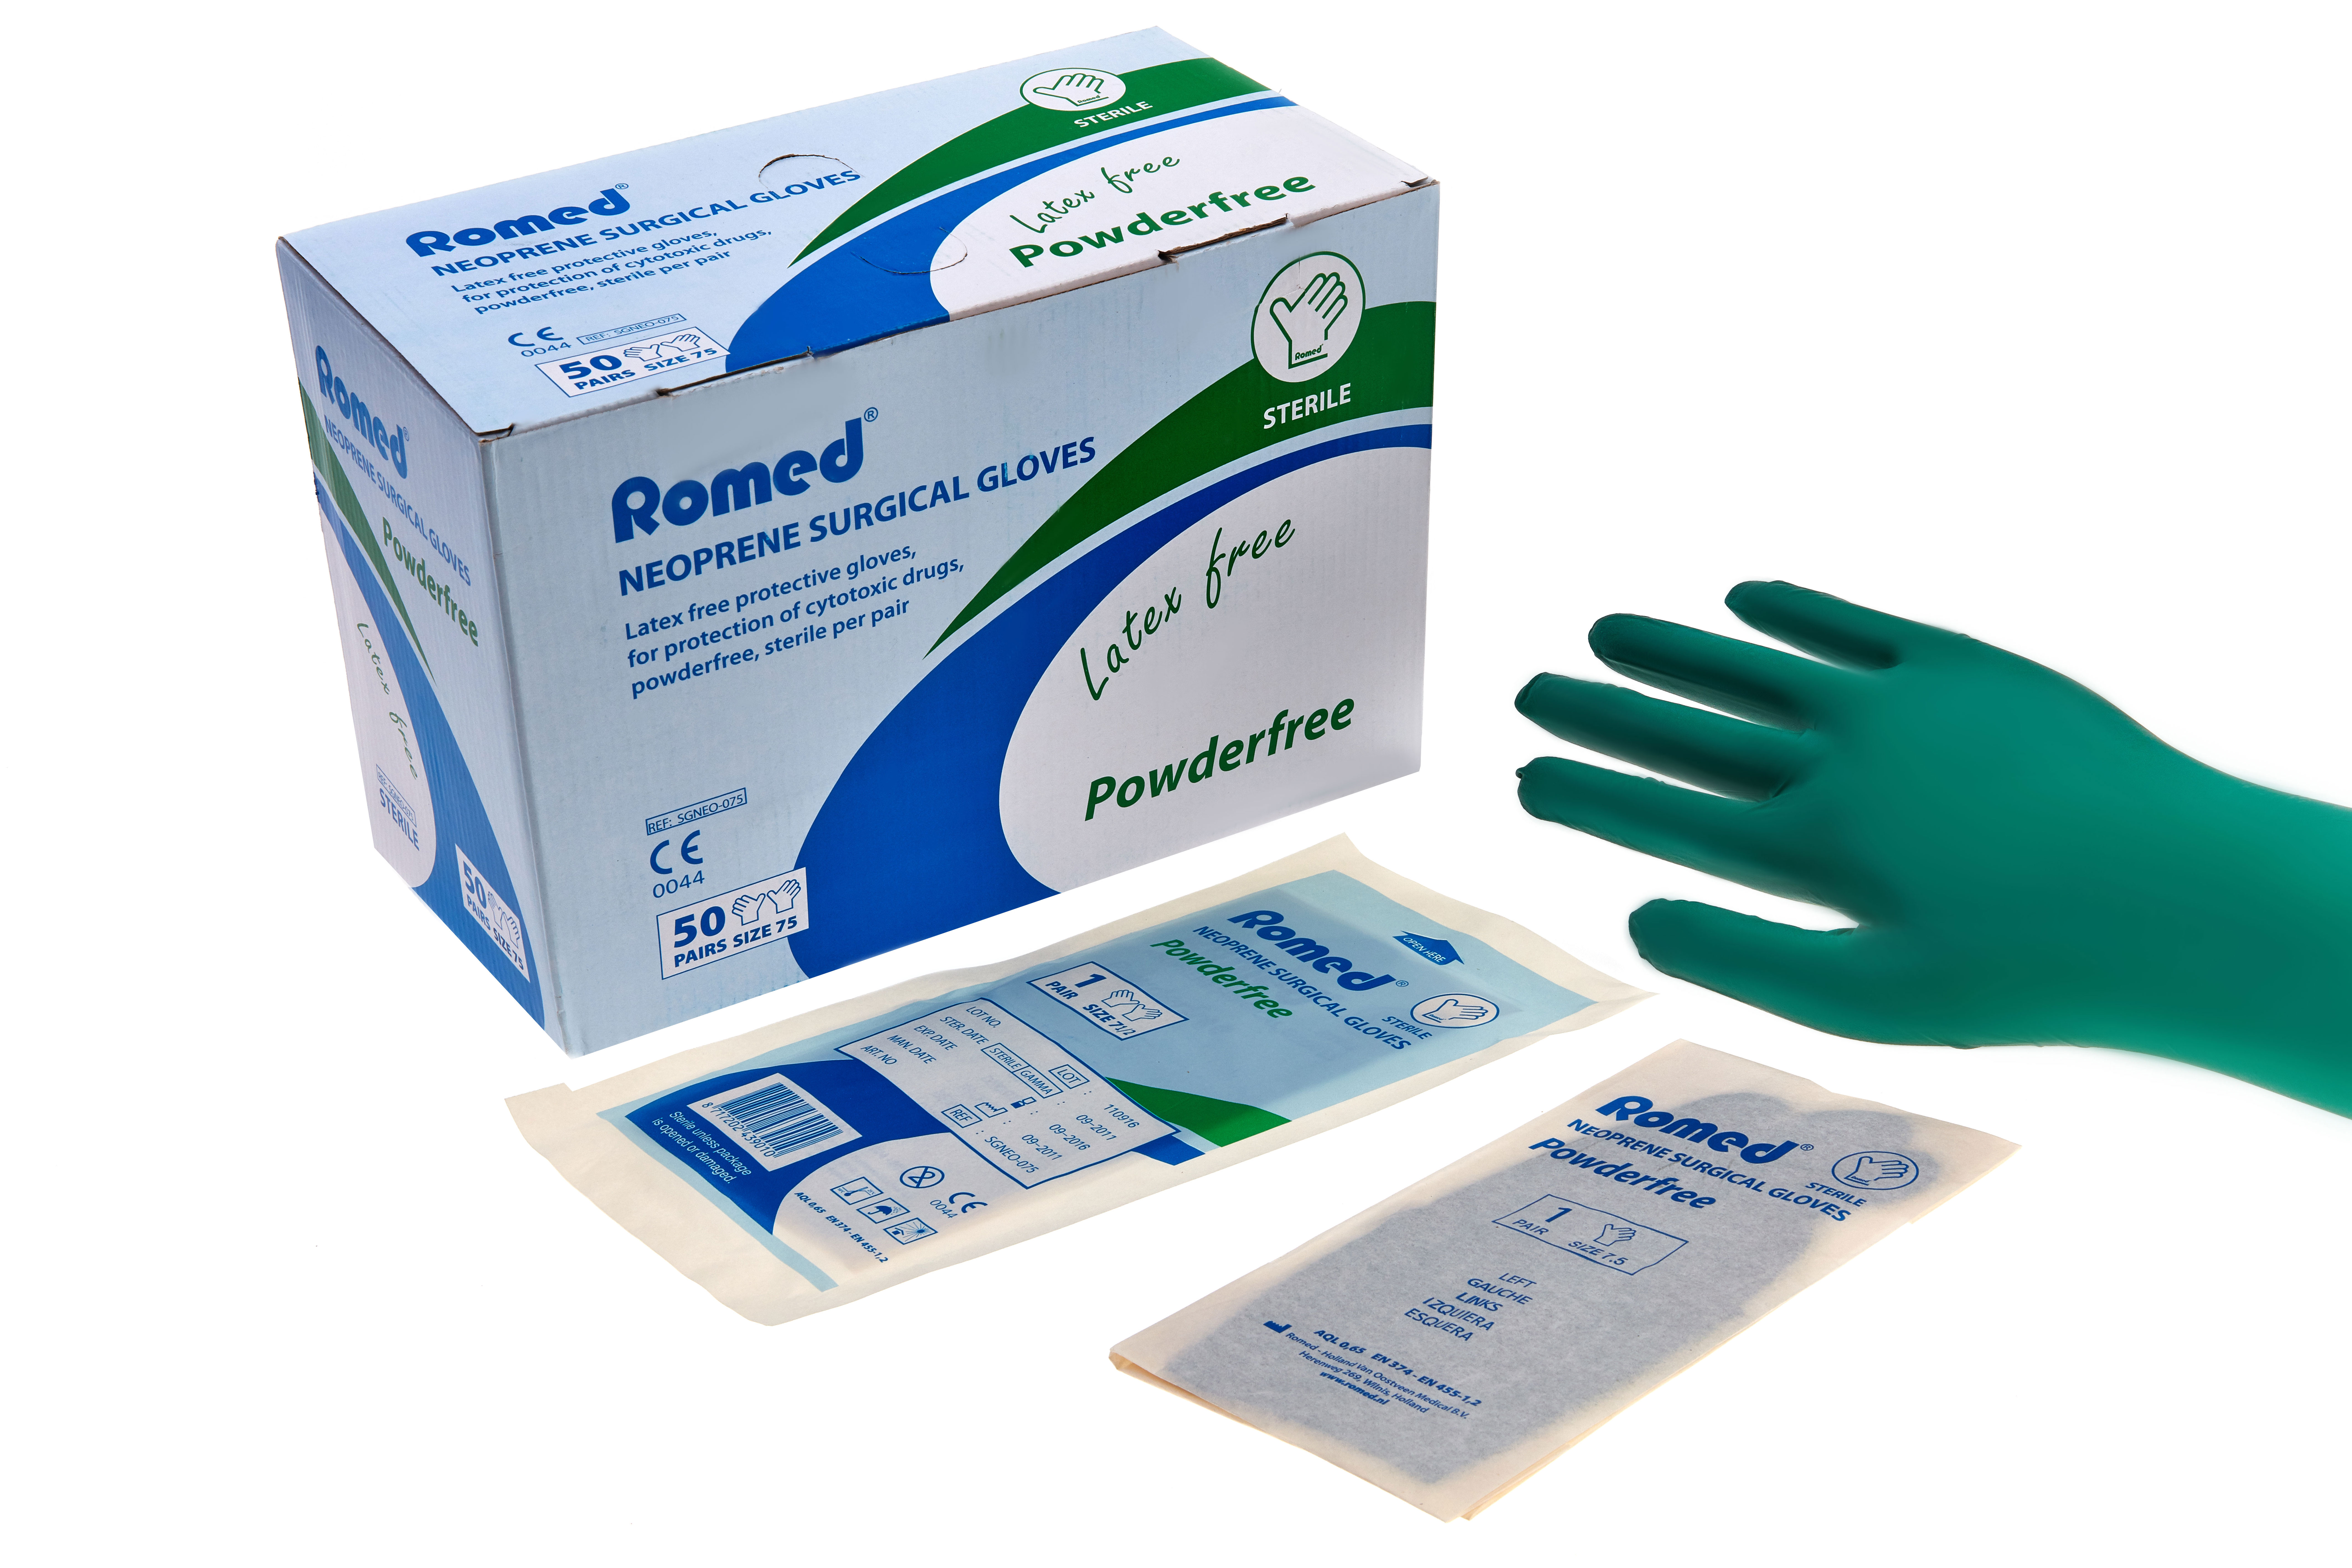 SGNEO-065 Romed latex free surgical gloves, for protection of cytotoxic drugs, powderfree, size 6.5, sterile per pair, 50 pairs in an inner box, 6 x 50 pairs = 300 pairs in a carton. On request